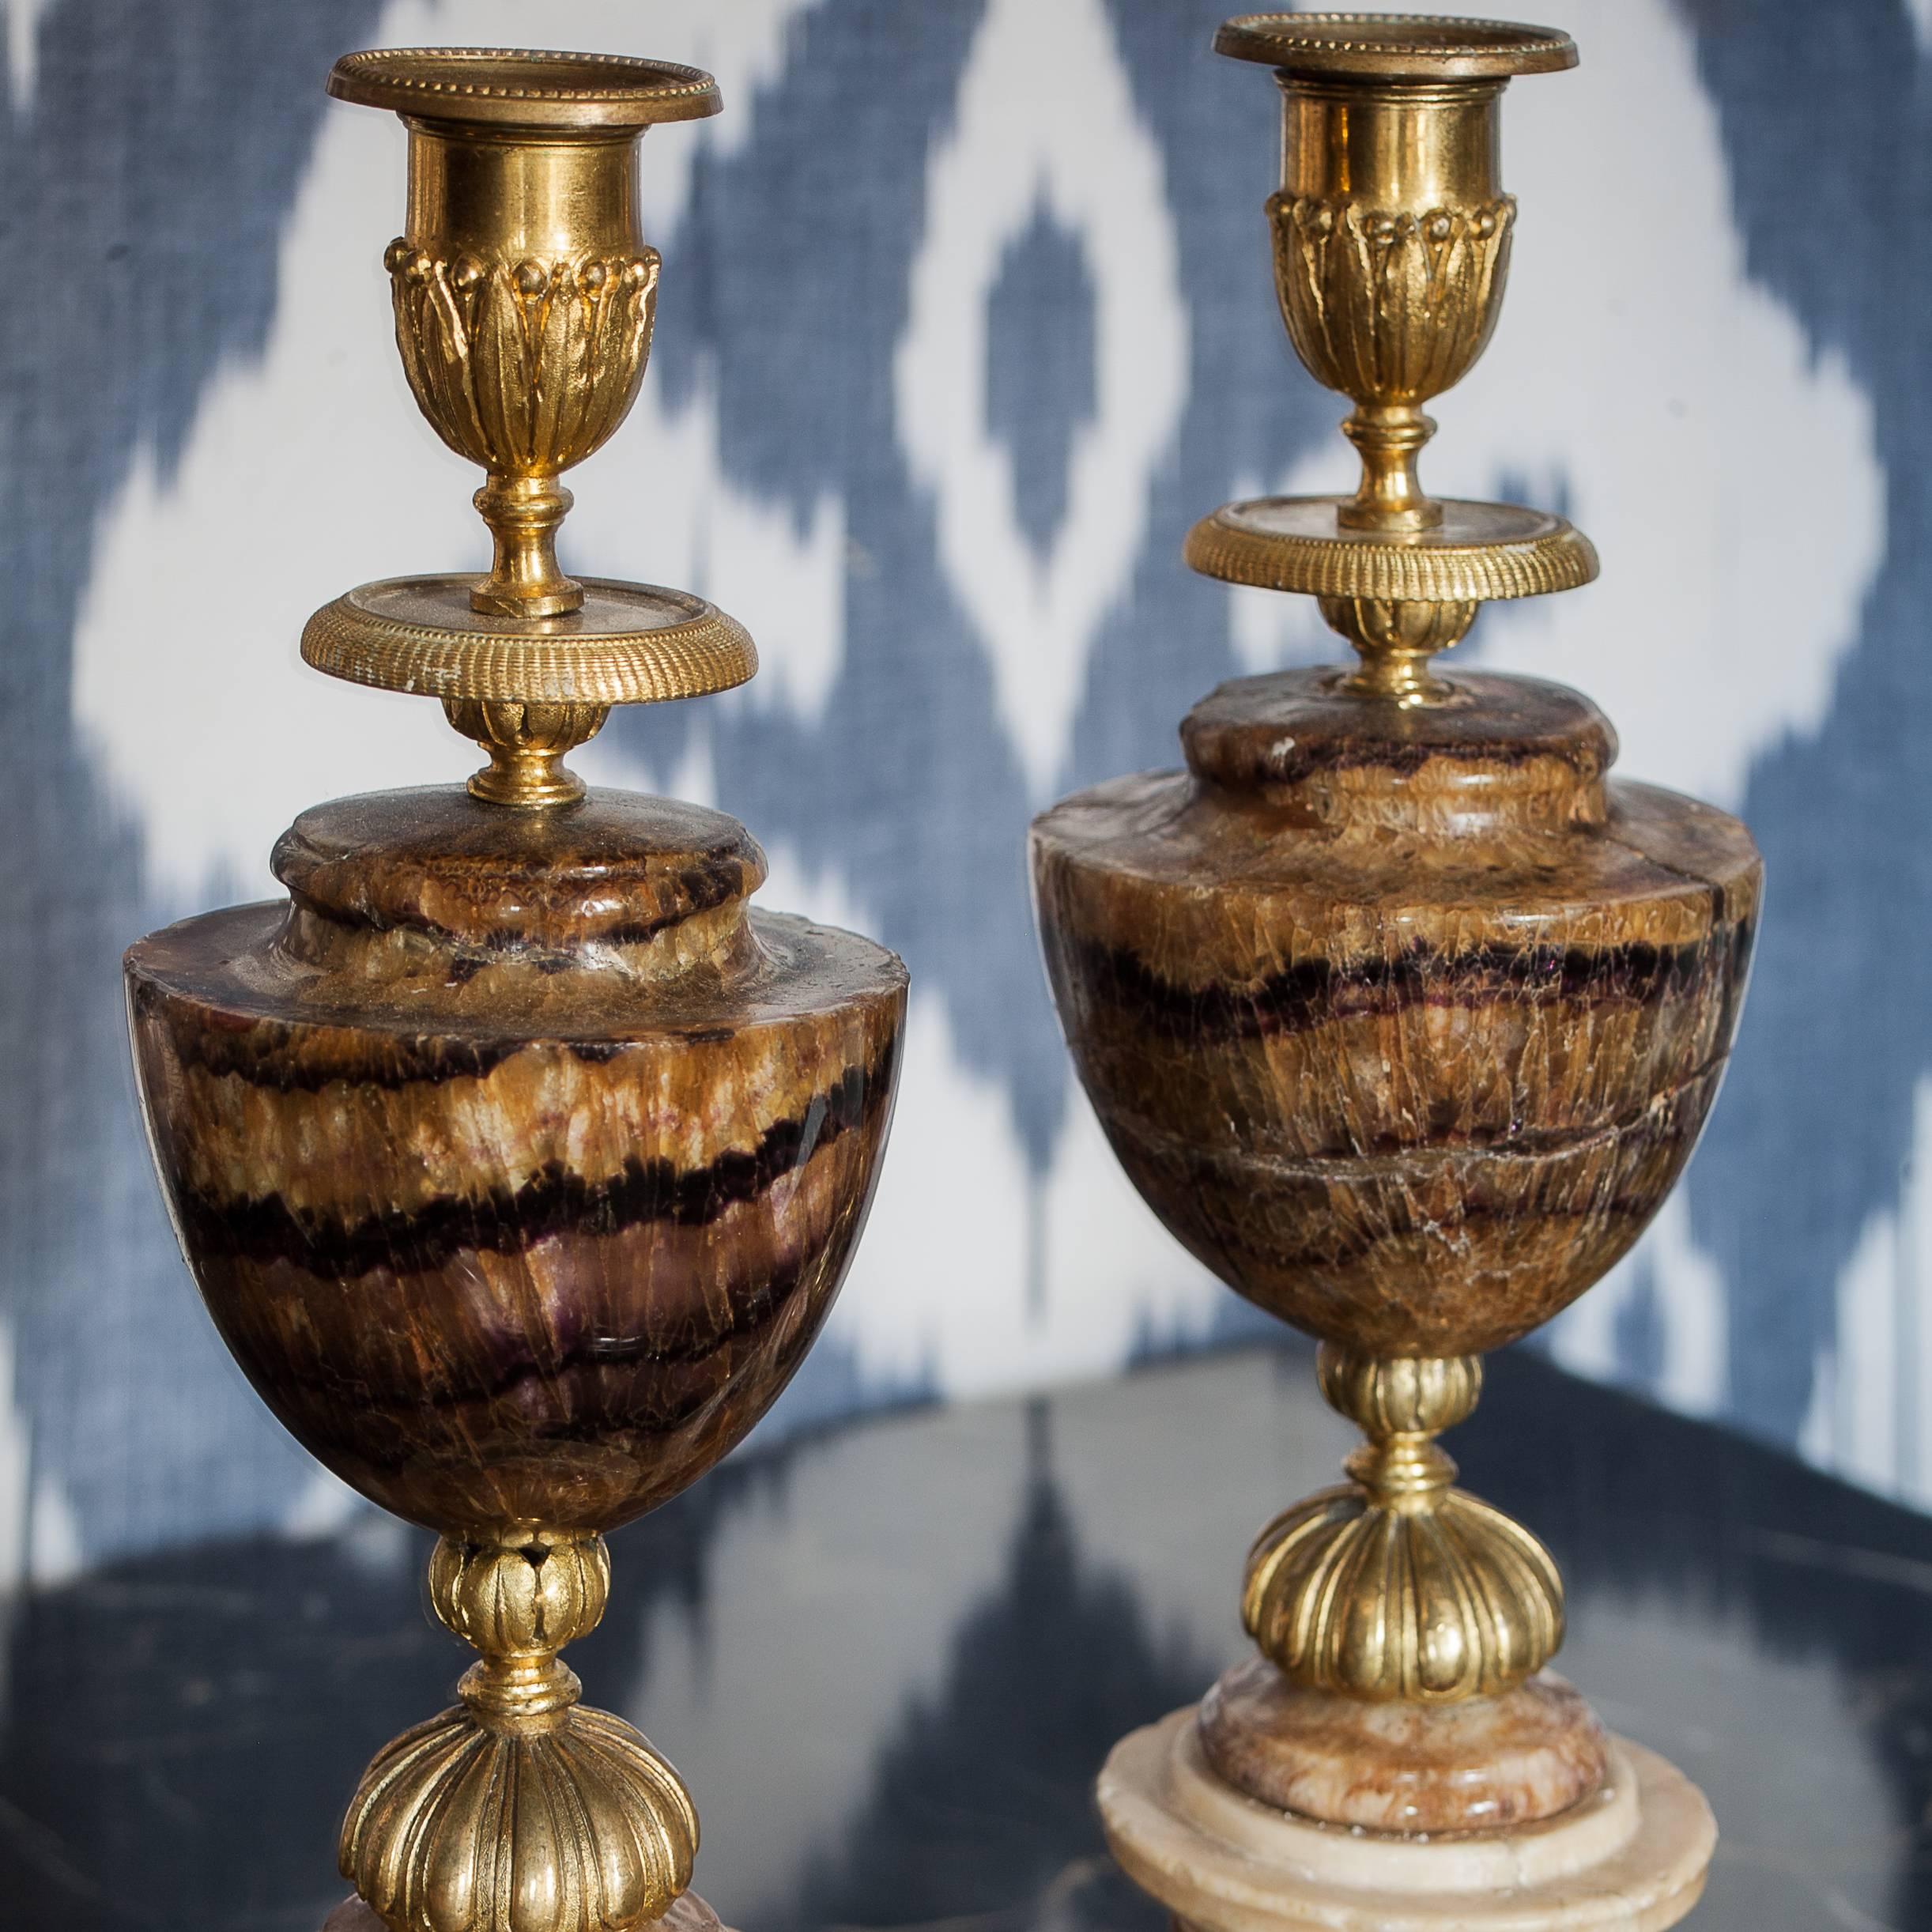 A pair of late 18th century Blue John candlesticks.
 
The form of the candlesticks is dominated by the urn shaped Blue John in the centre of each.
 
The superb quality of the ormolu mounts feature a cup decorated with laurel leaves and berries,